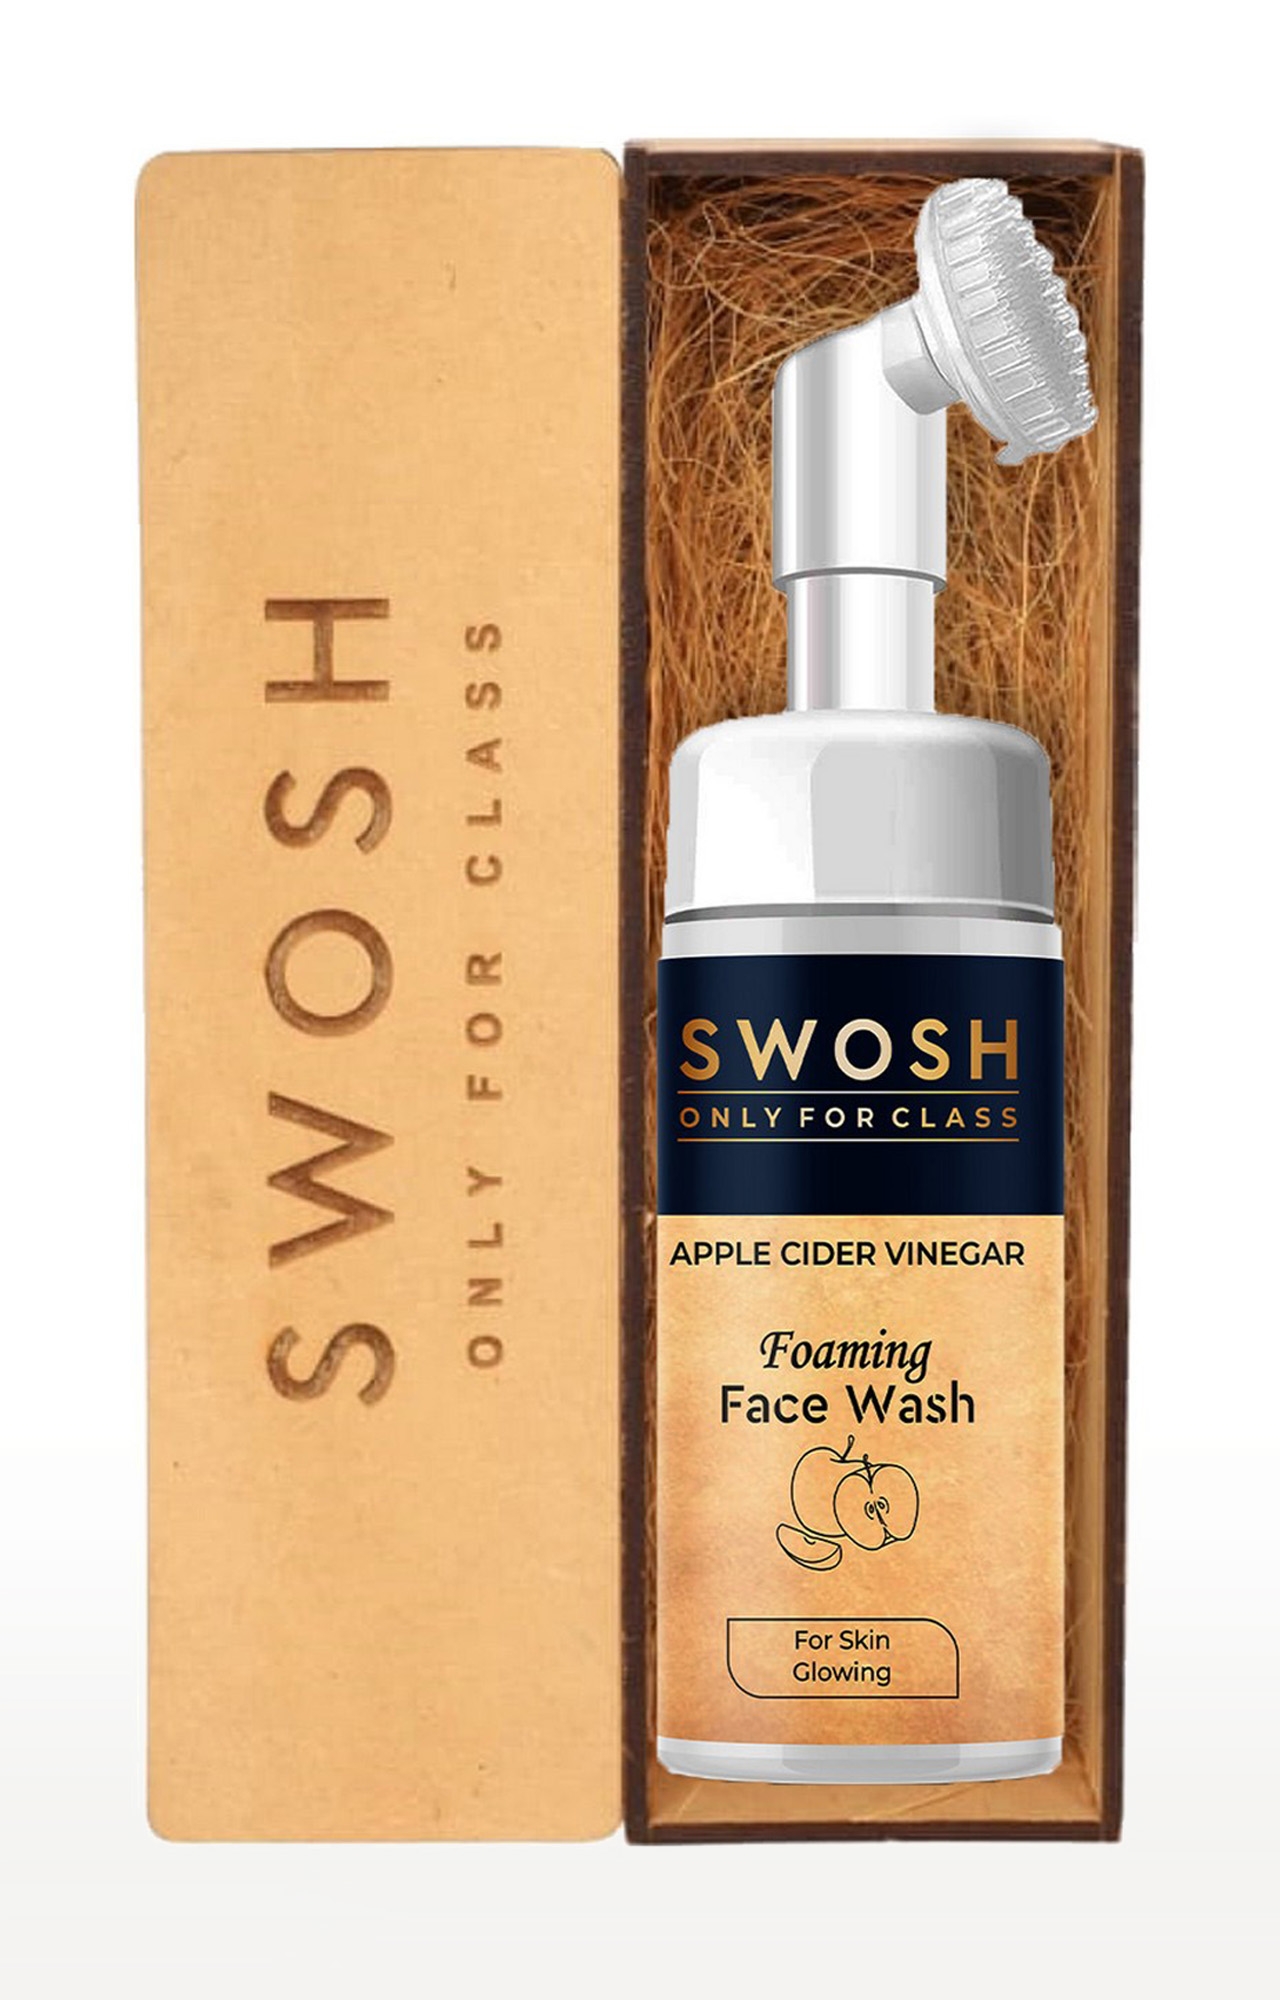 SWOSH | Swosh Apple Cider Vinegar (Apple Extract) Foaming Face Wash For Acne Prone & Oily Skin - No Parabens, Sulphate, Silicones & Colour (With Built-In Face Brush), 100 Ml